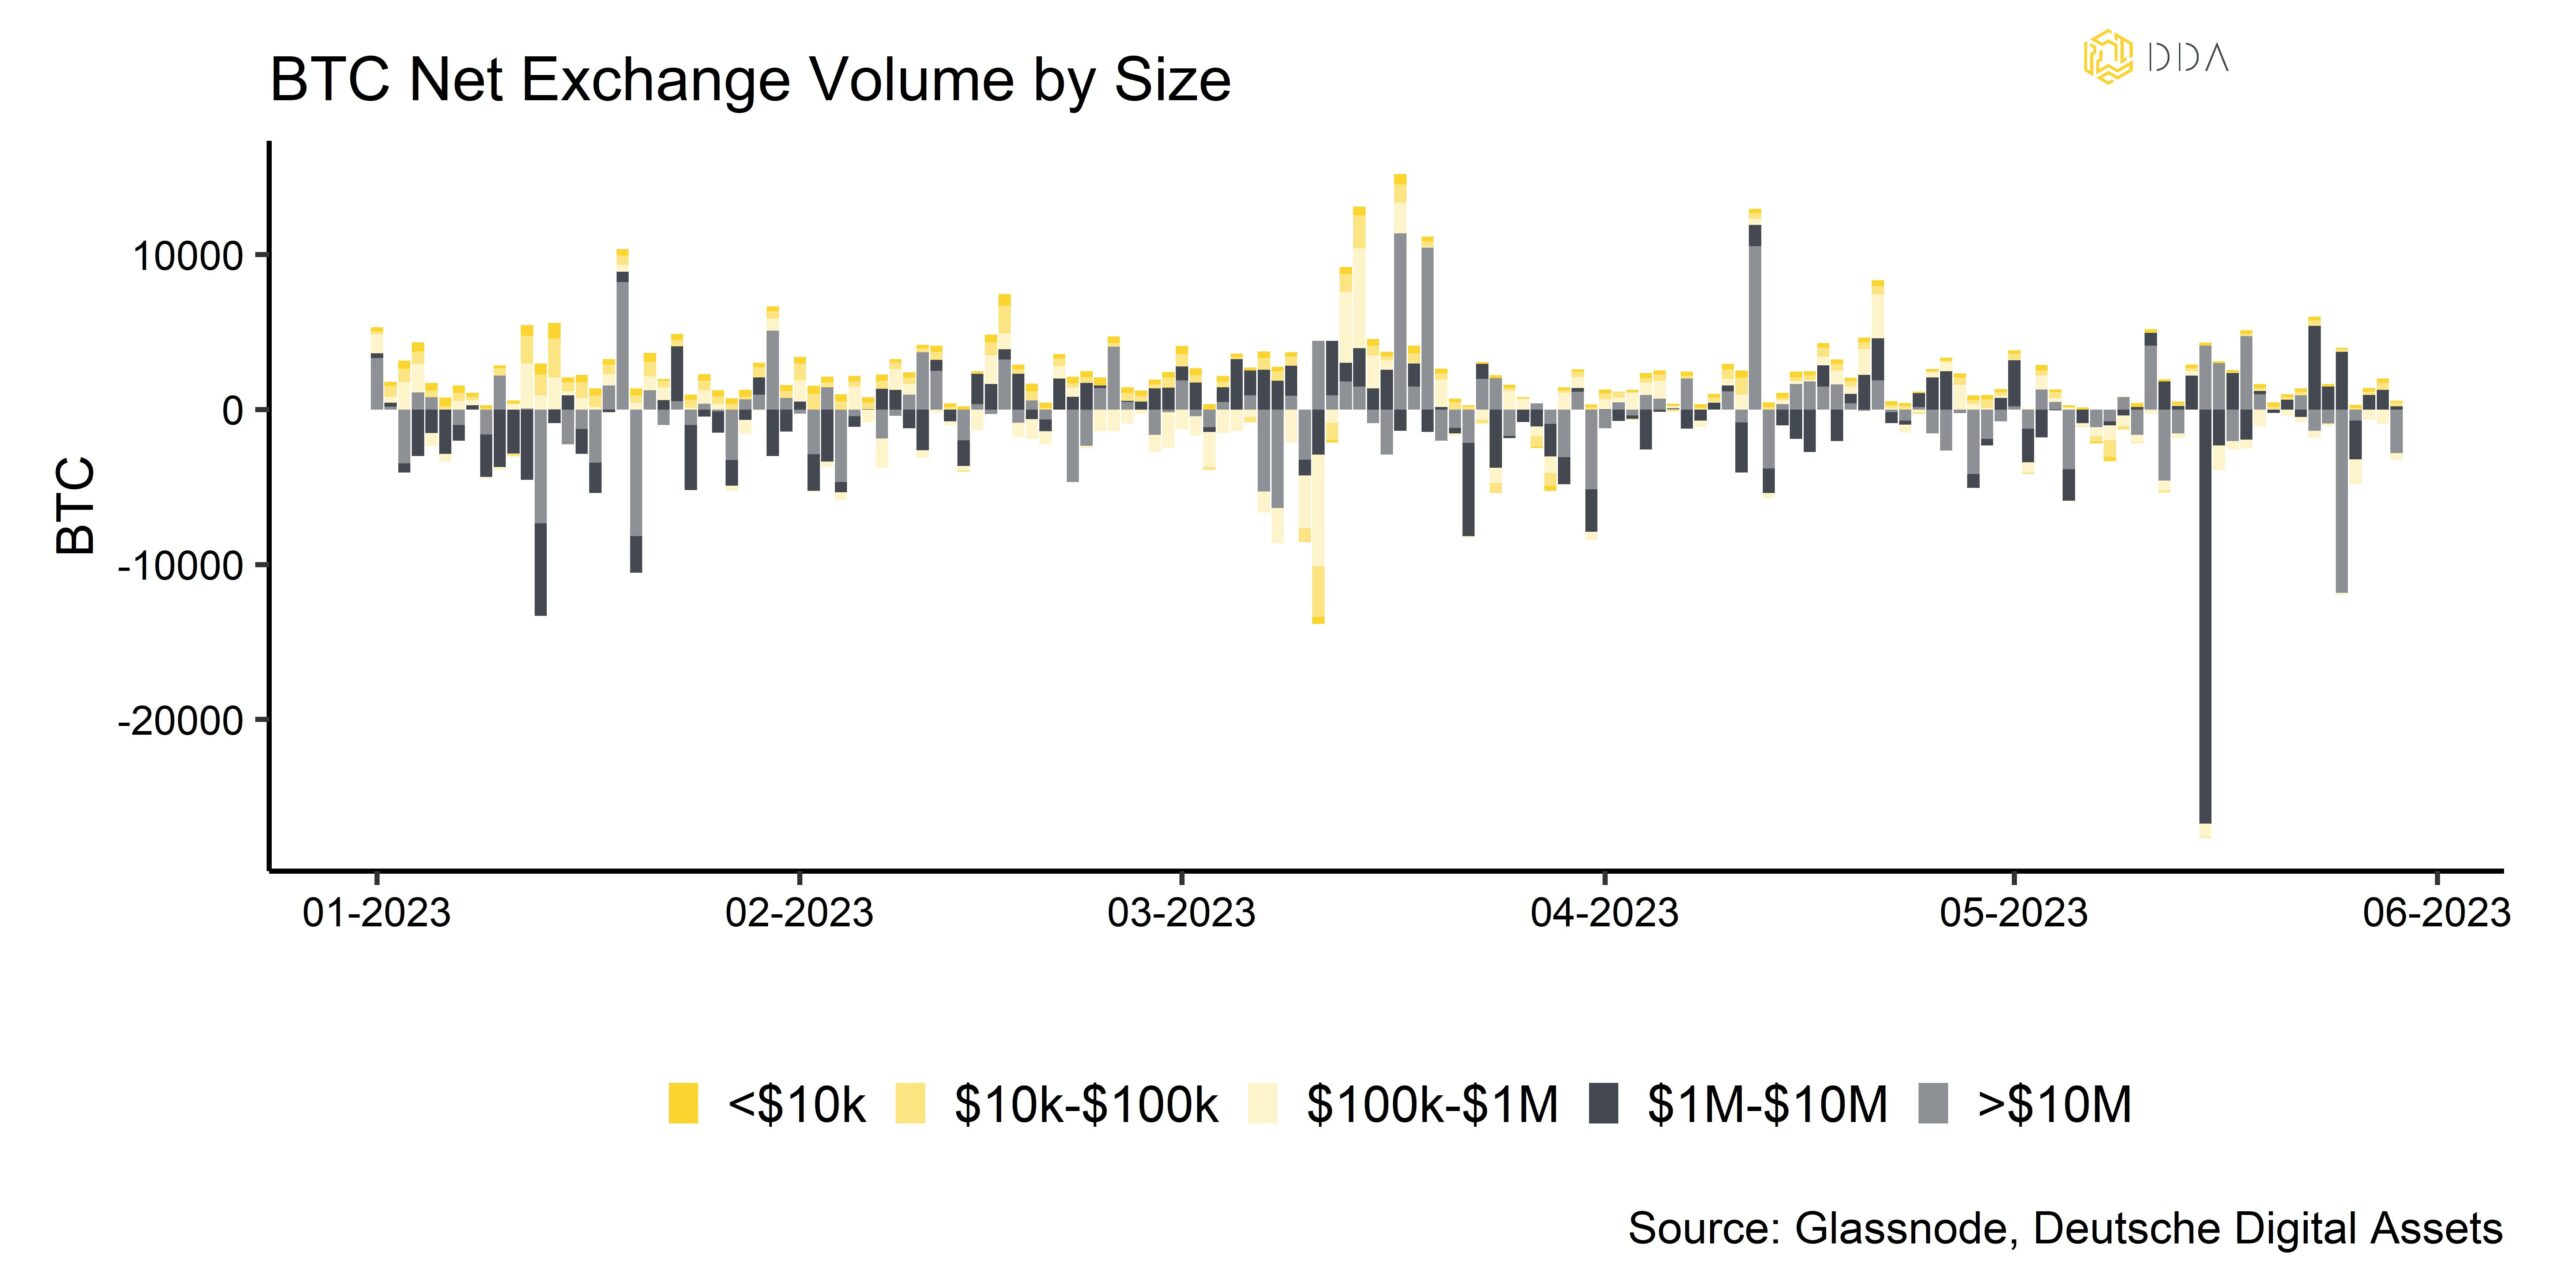 Bitcoin net exchange volume by size